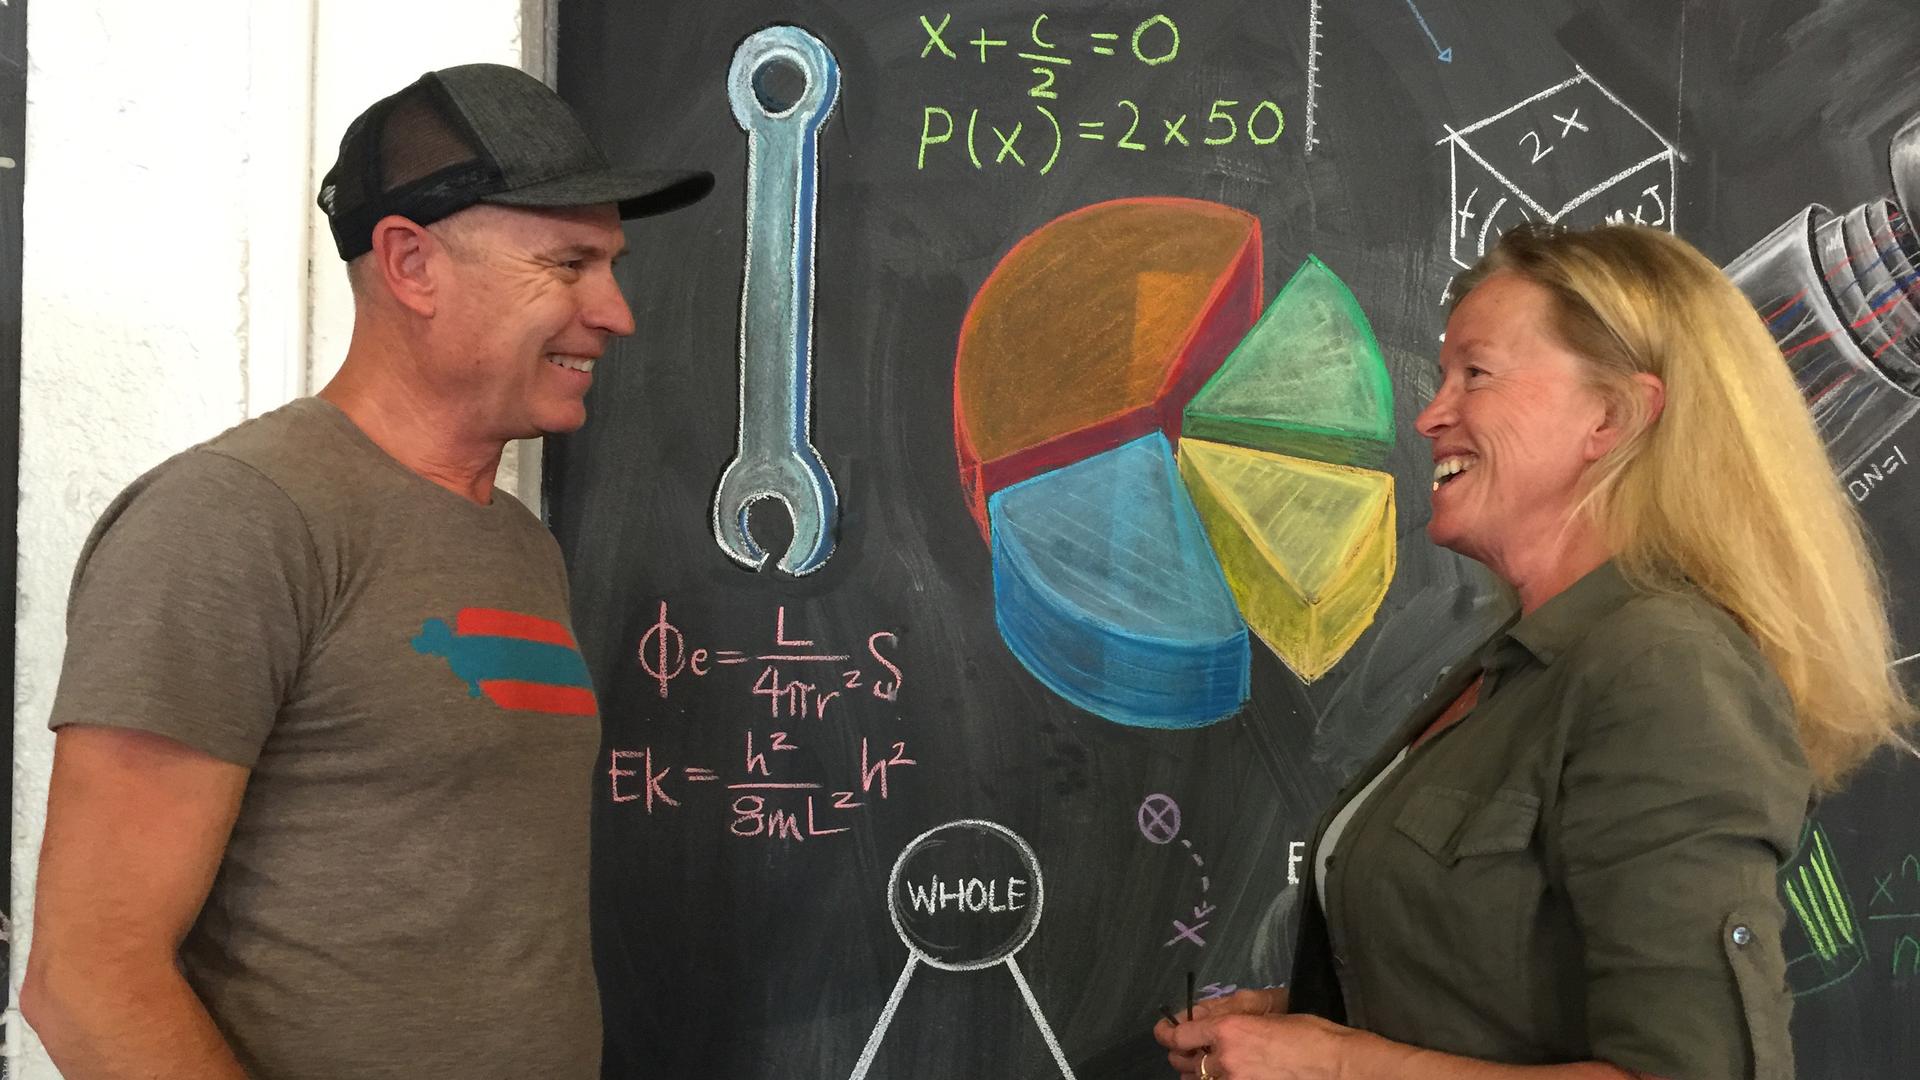 Explorers Tom and Tina Sjogren stand in front of a blackboard at a makers space.